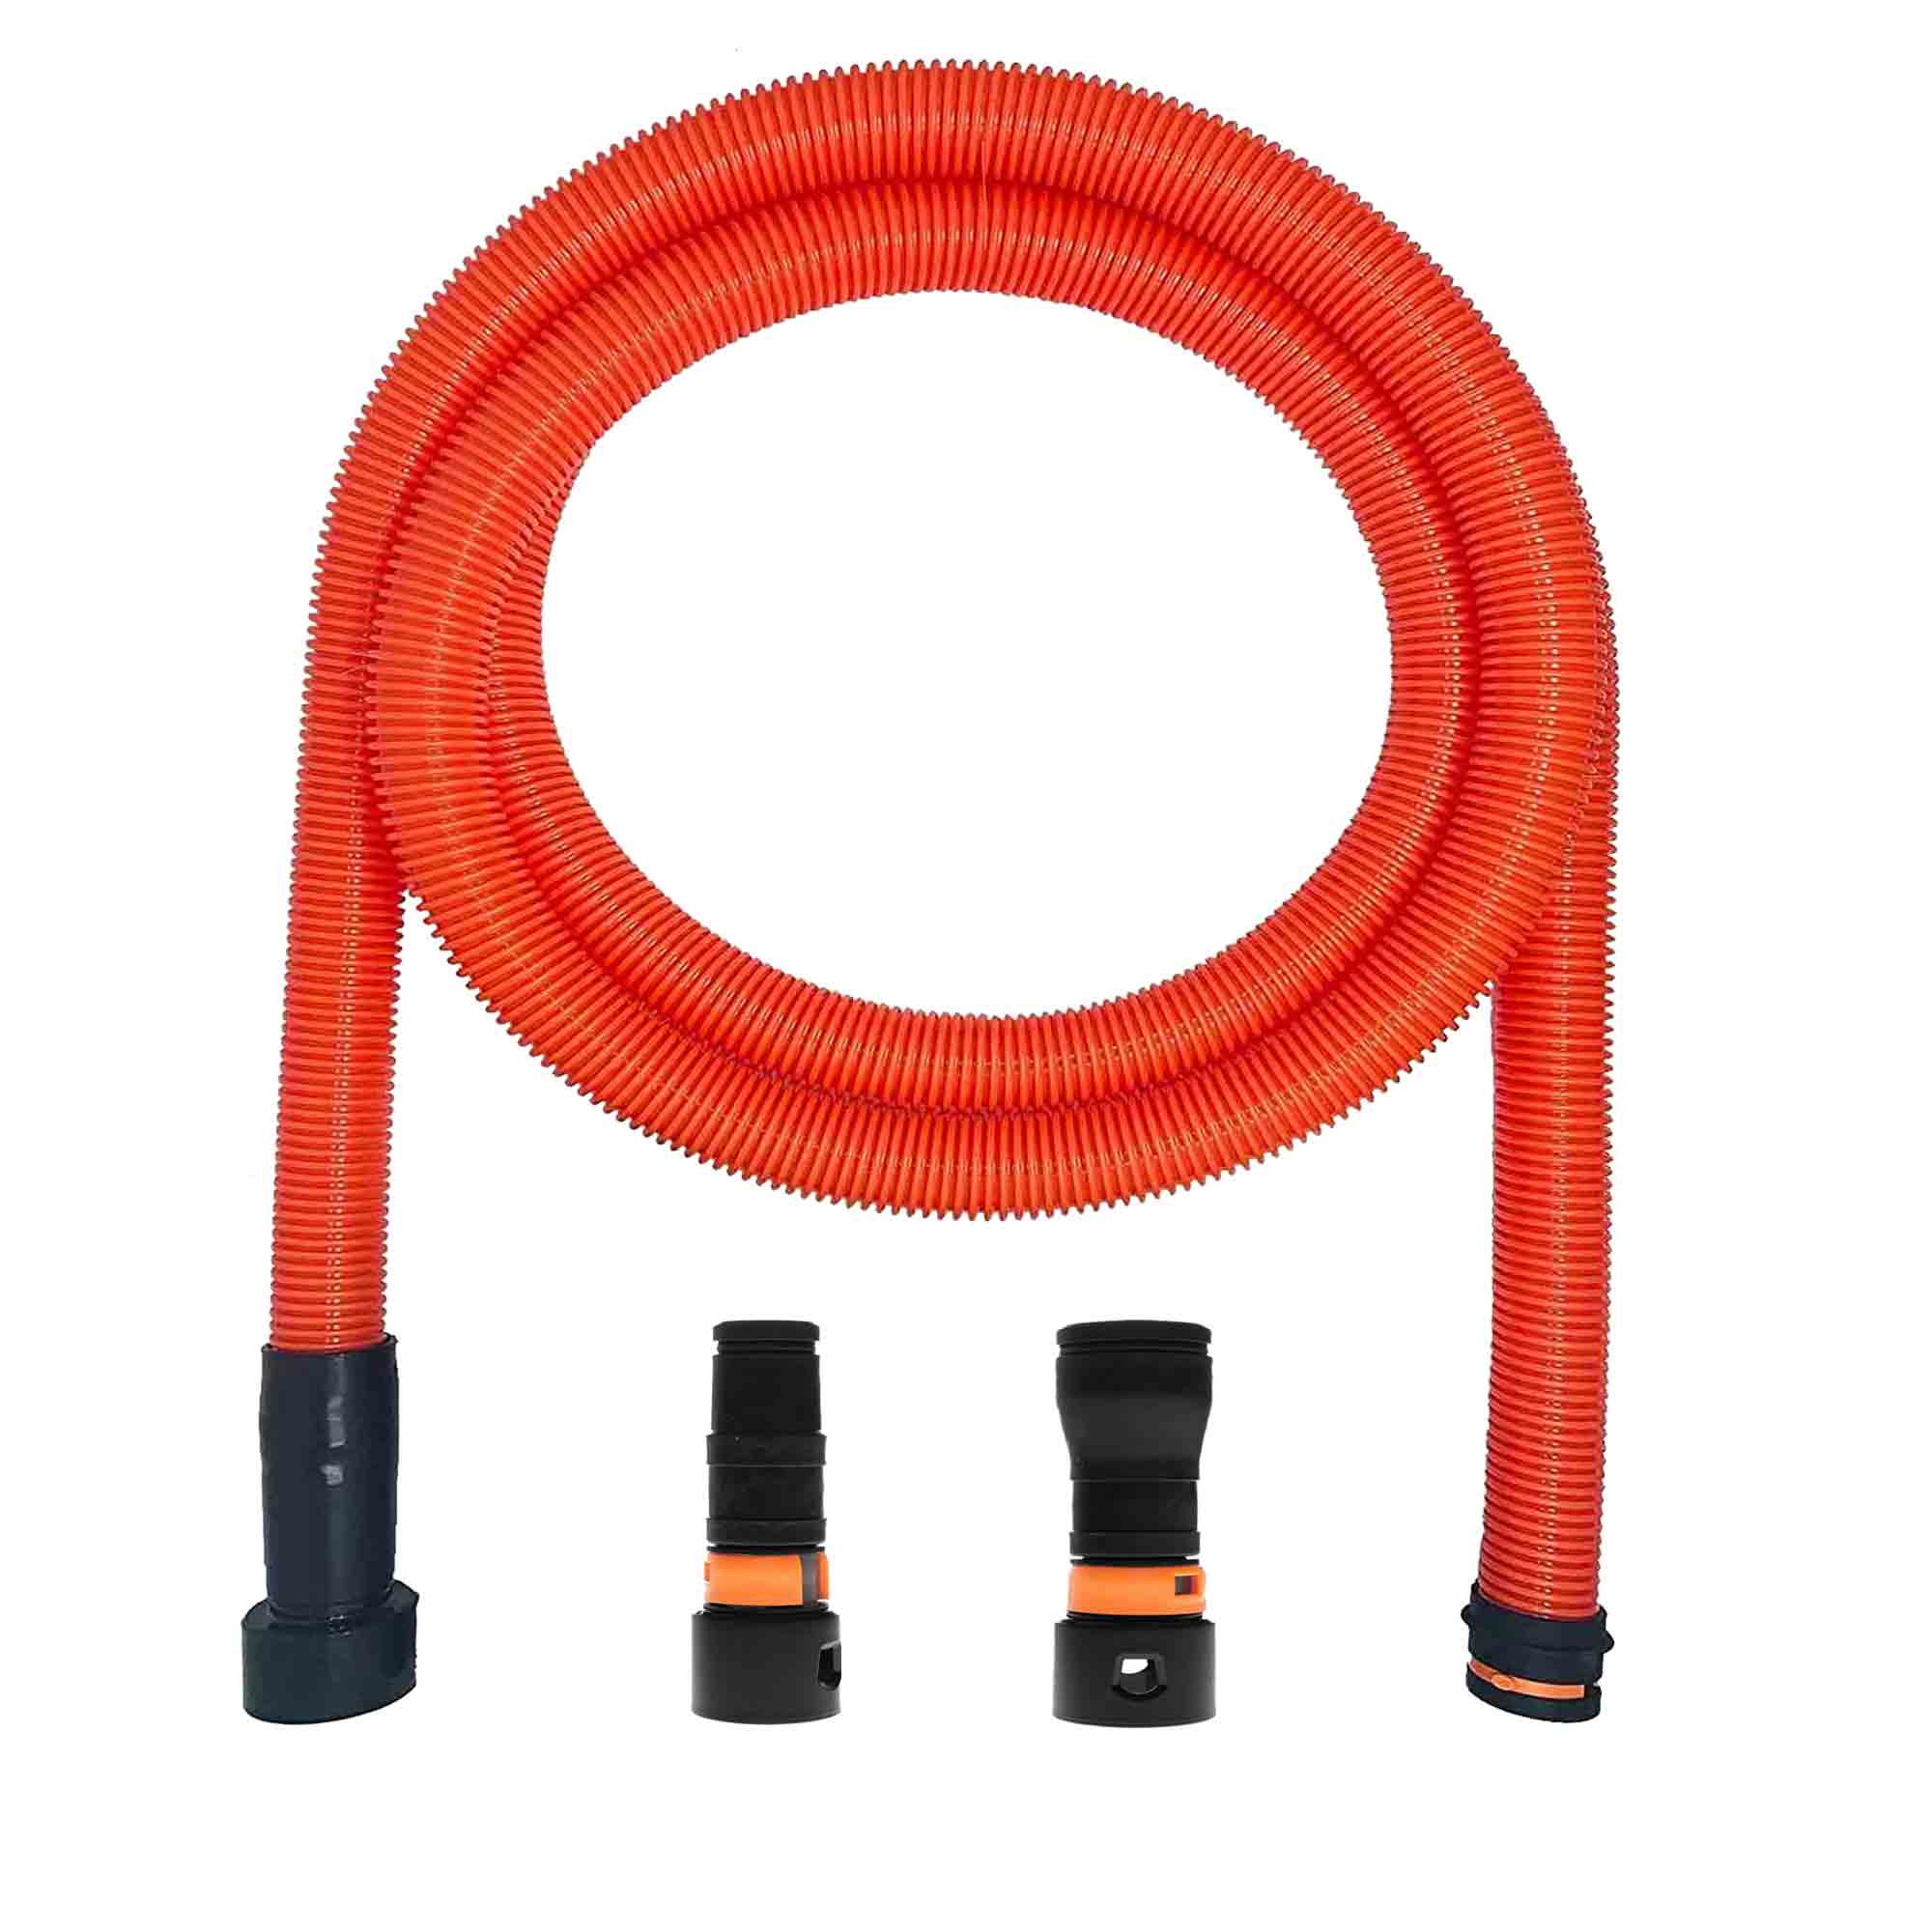 VPC Dust Collection Hose for Home and Shop Vacuums with Power Tool